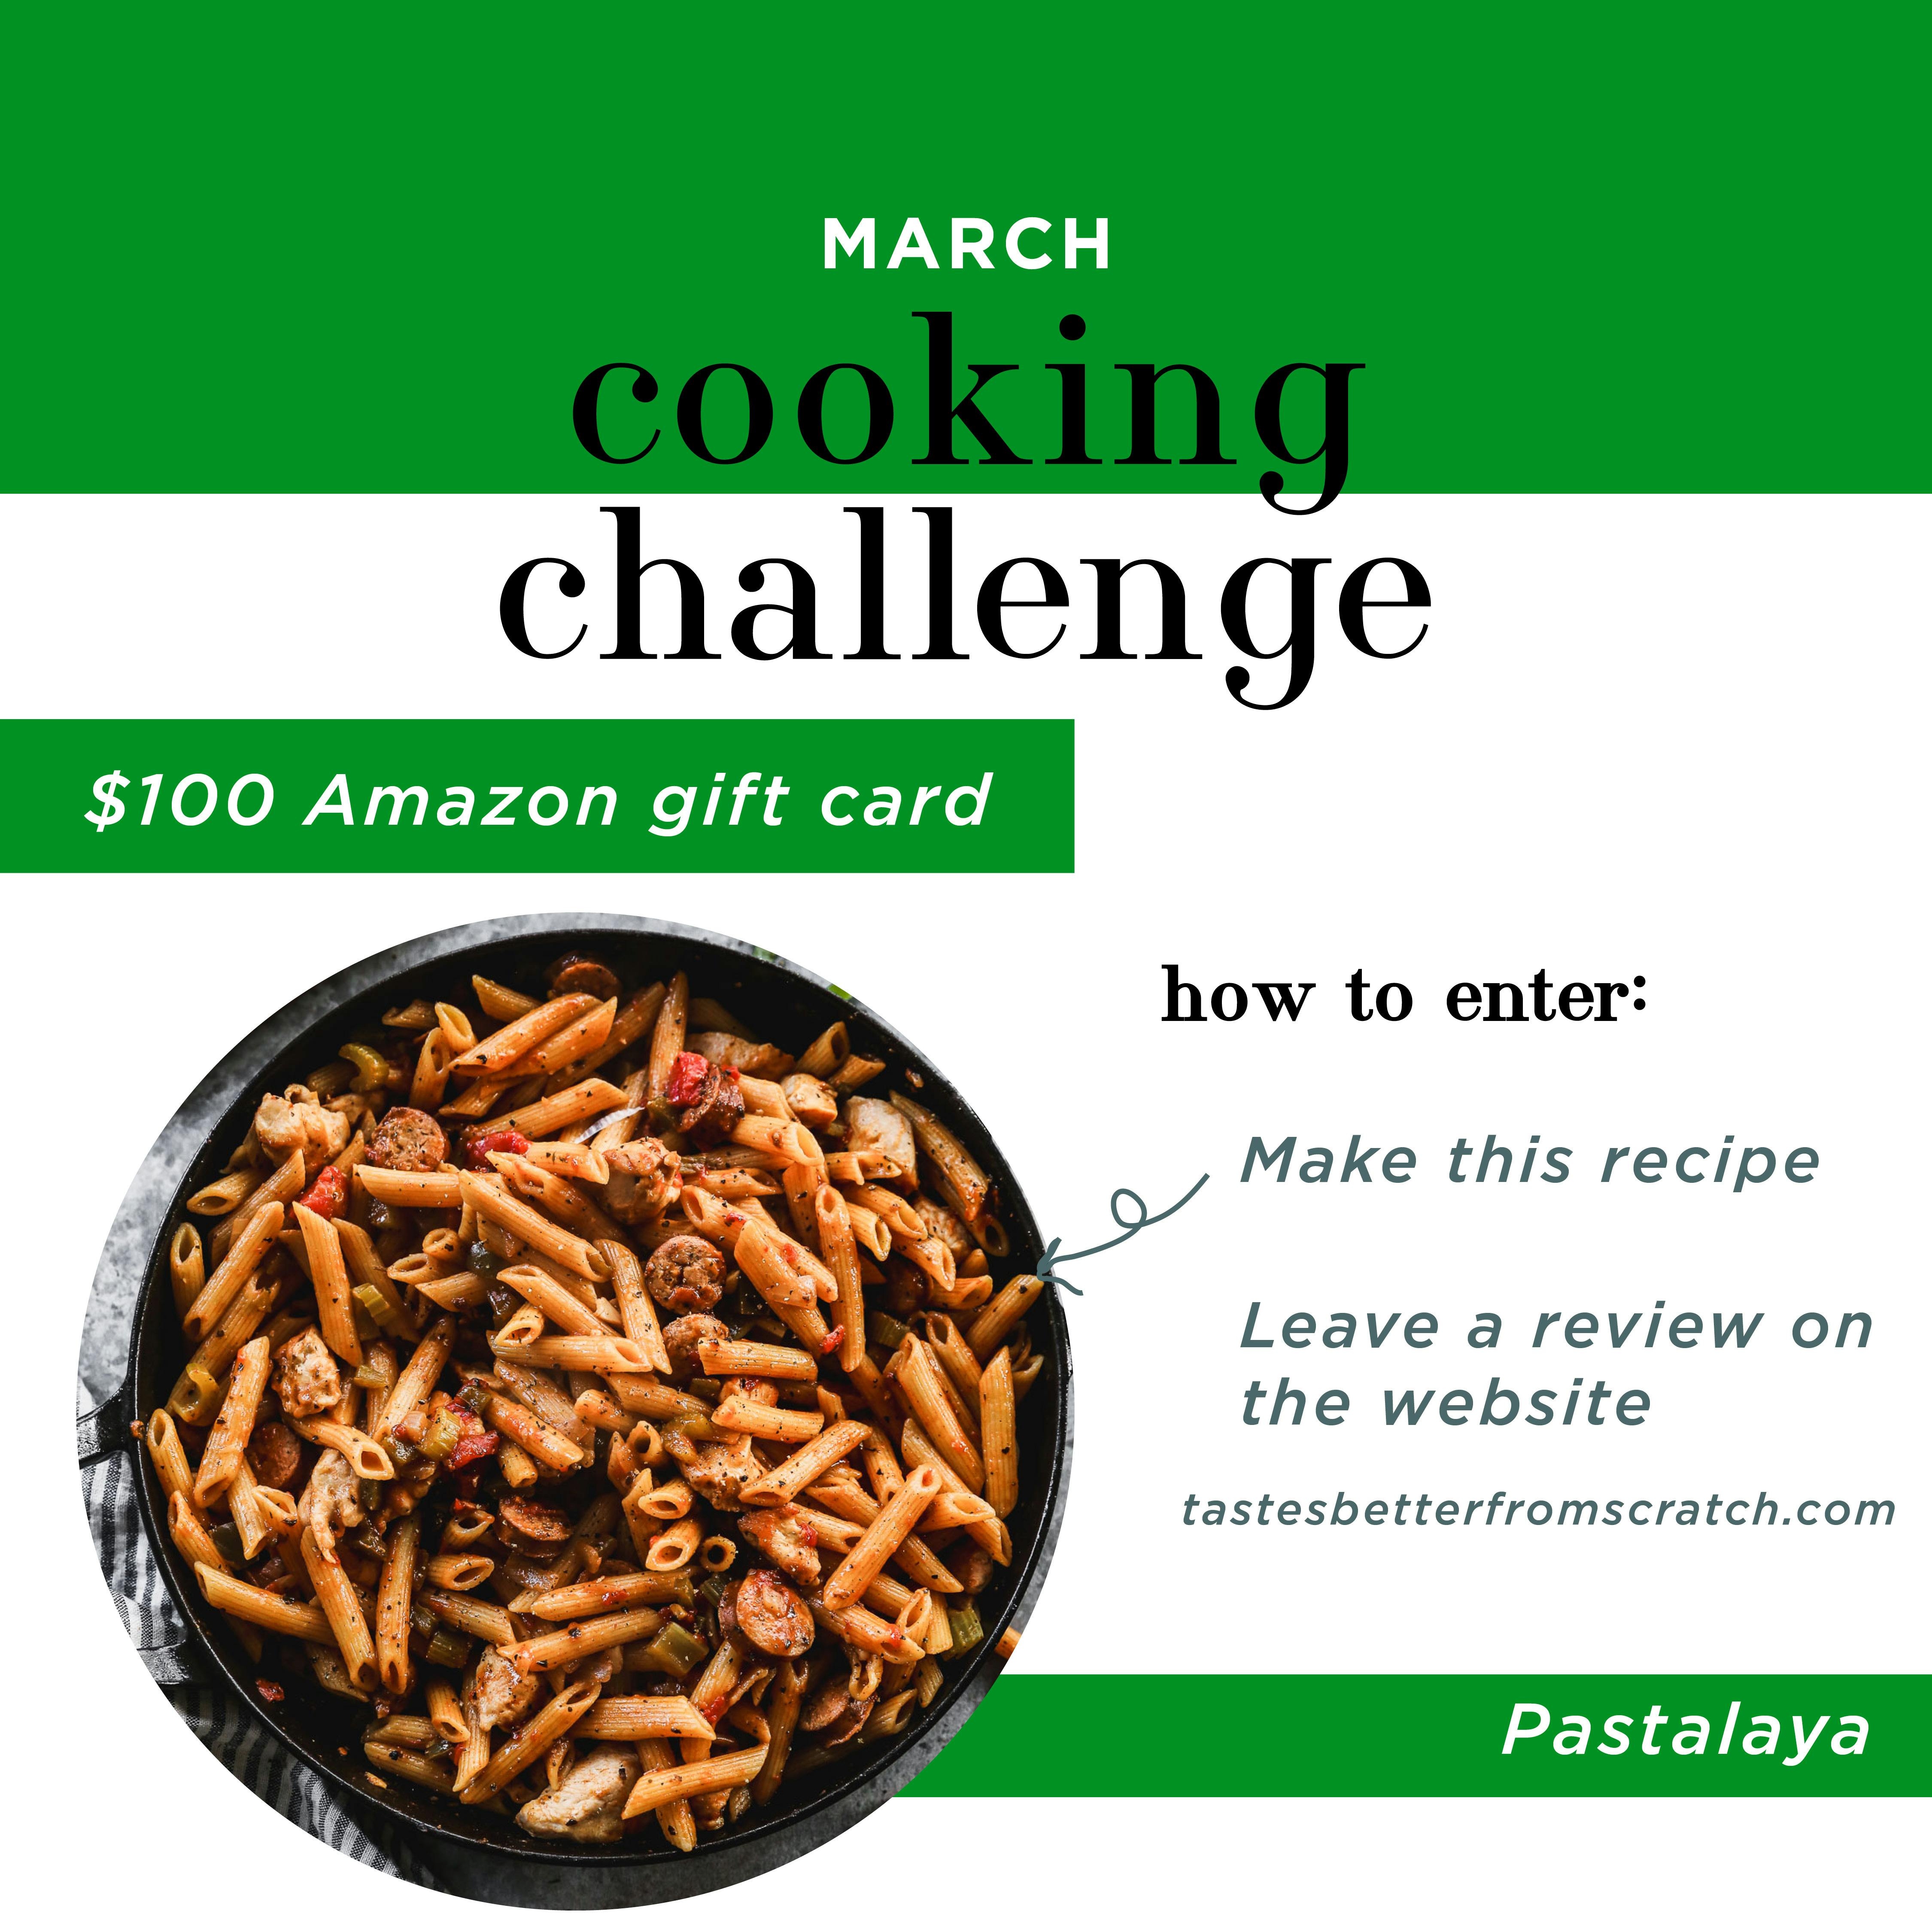 March cooking challenge, win a $100 Amazon gift card. How to enter: make this recipe, leave a review on the website. www.tastesbetterfromscratch.com  Pastalaya